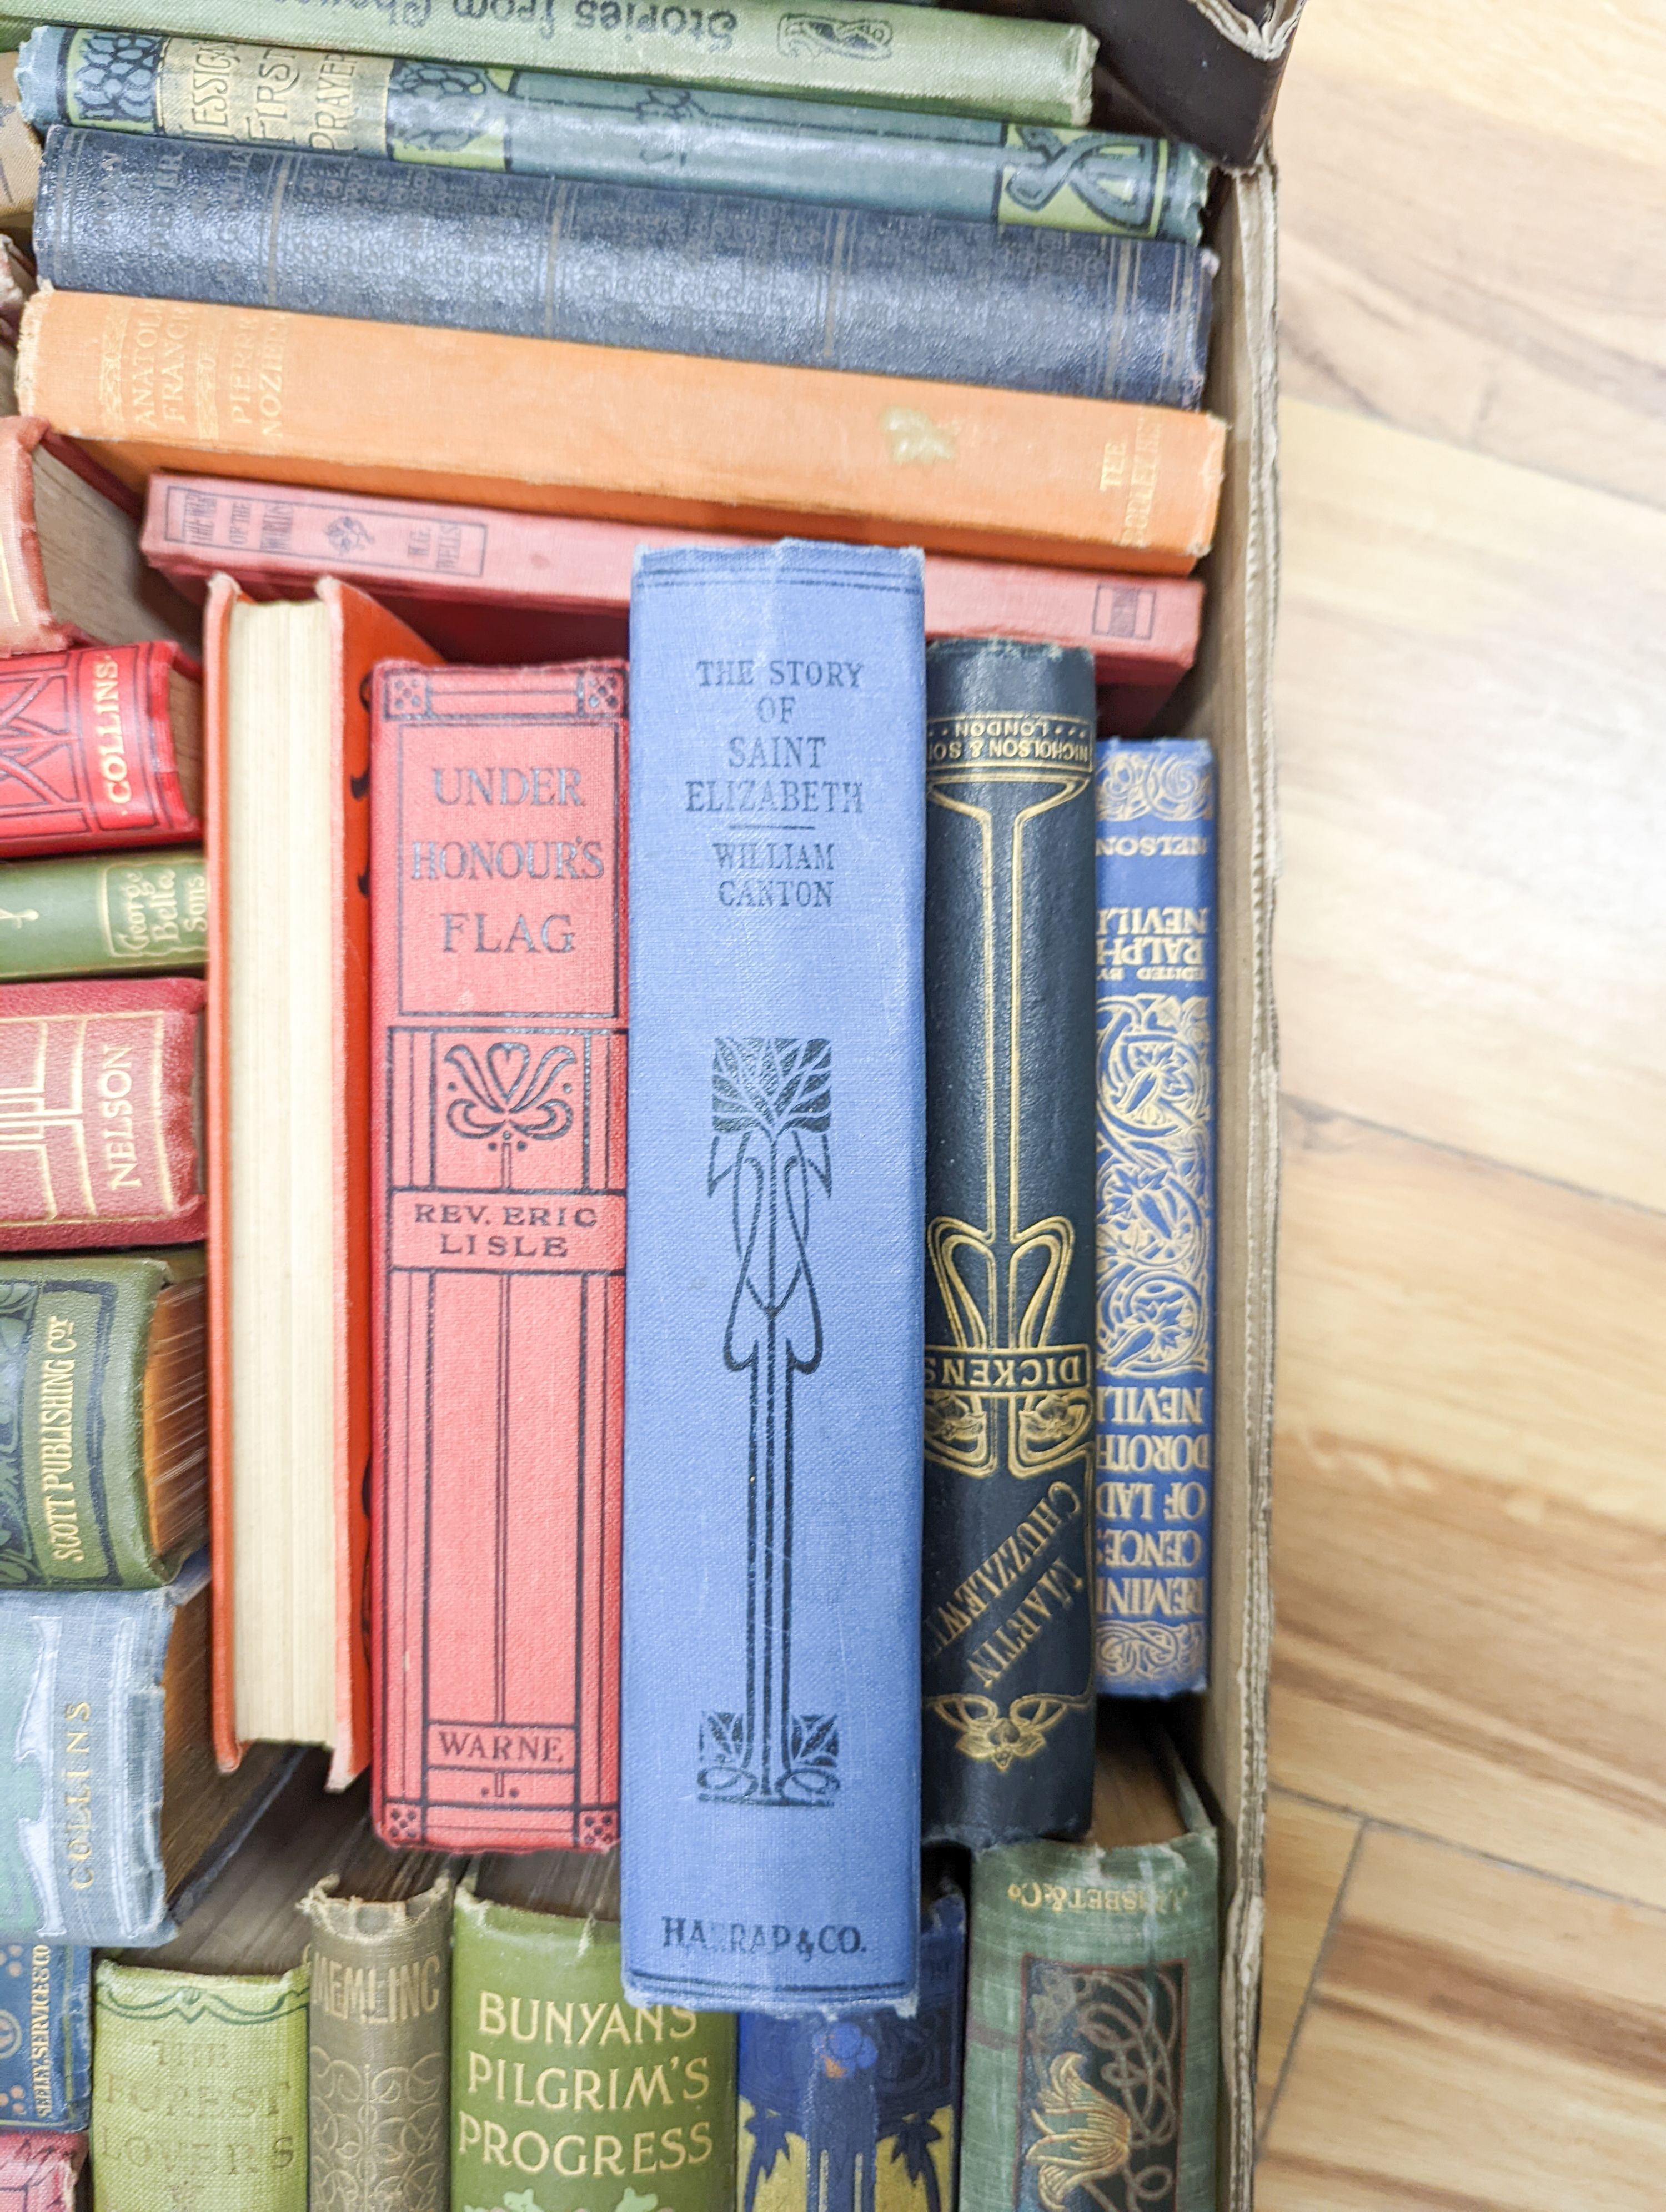 A collection of 33 late 19th/early 20th century works with Art Nouveau decorated bindings, consisting of poetry and fiction.